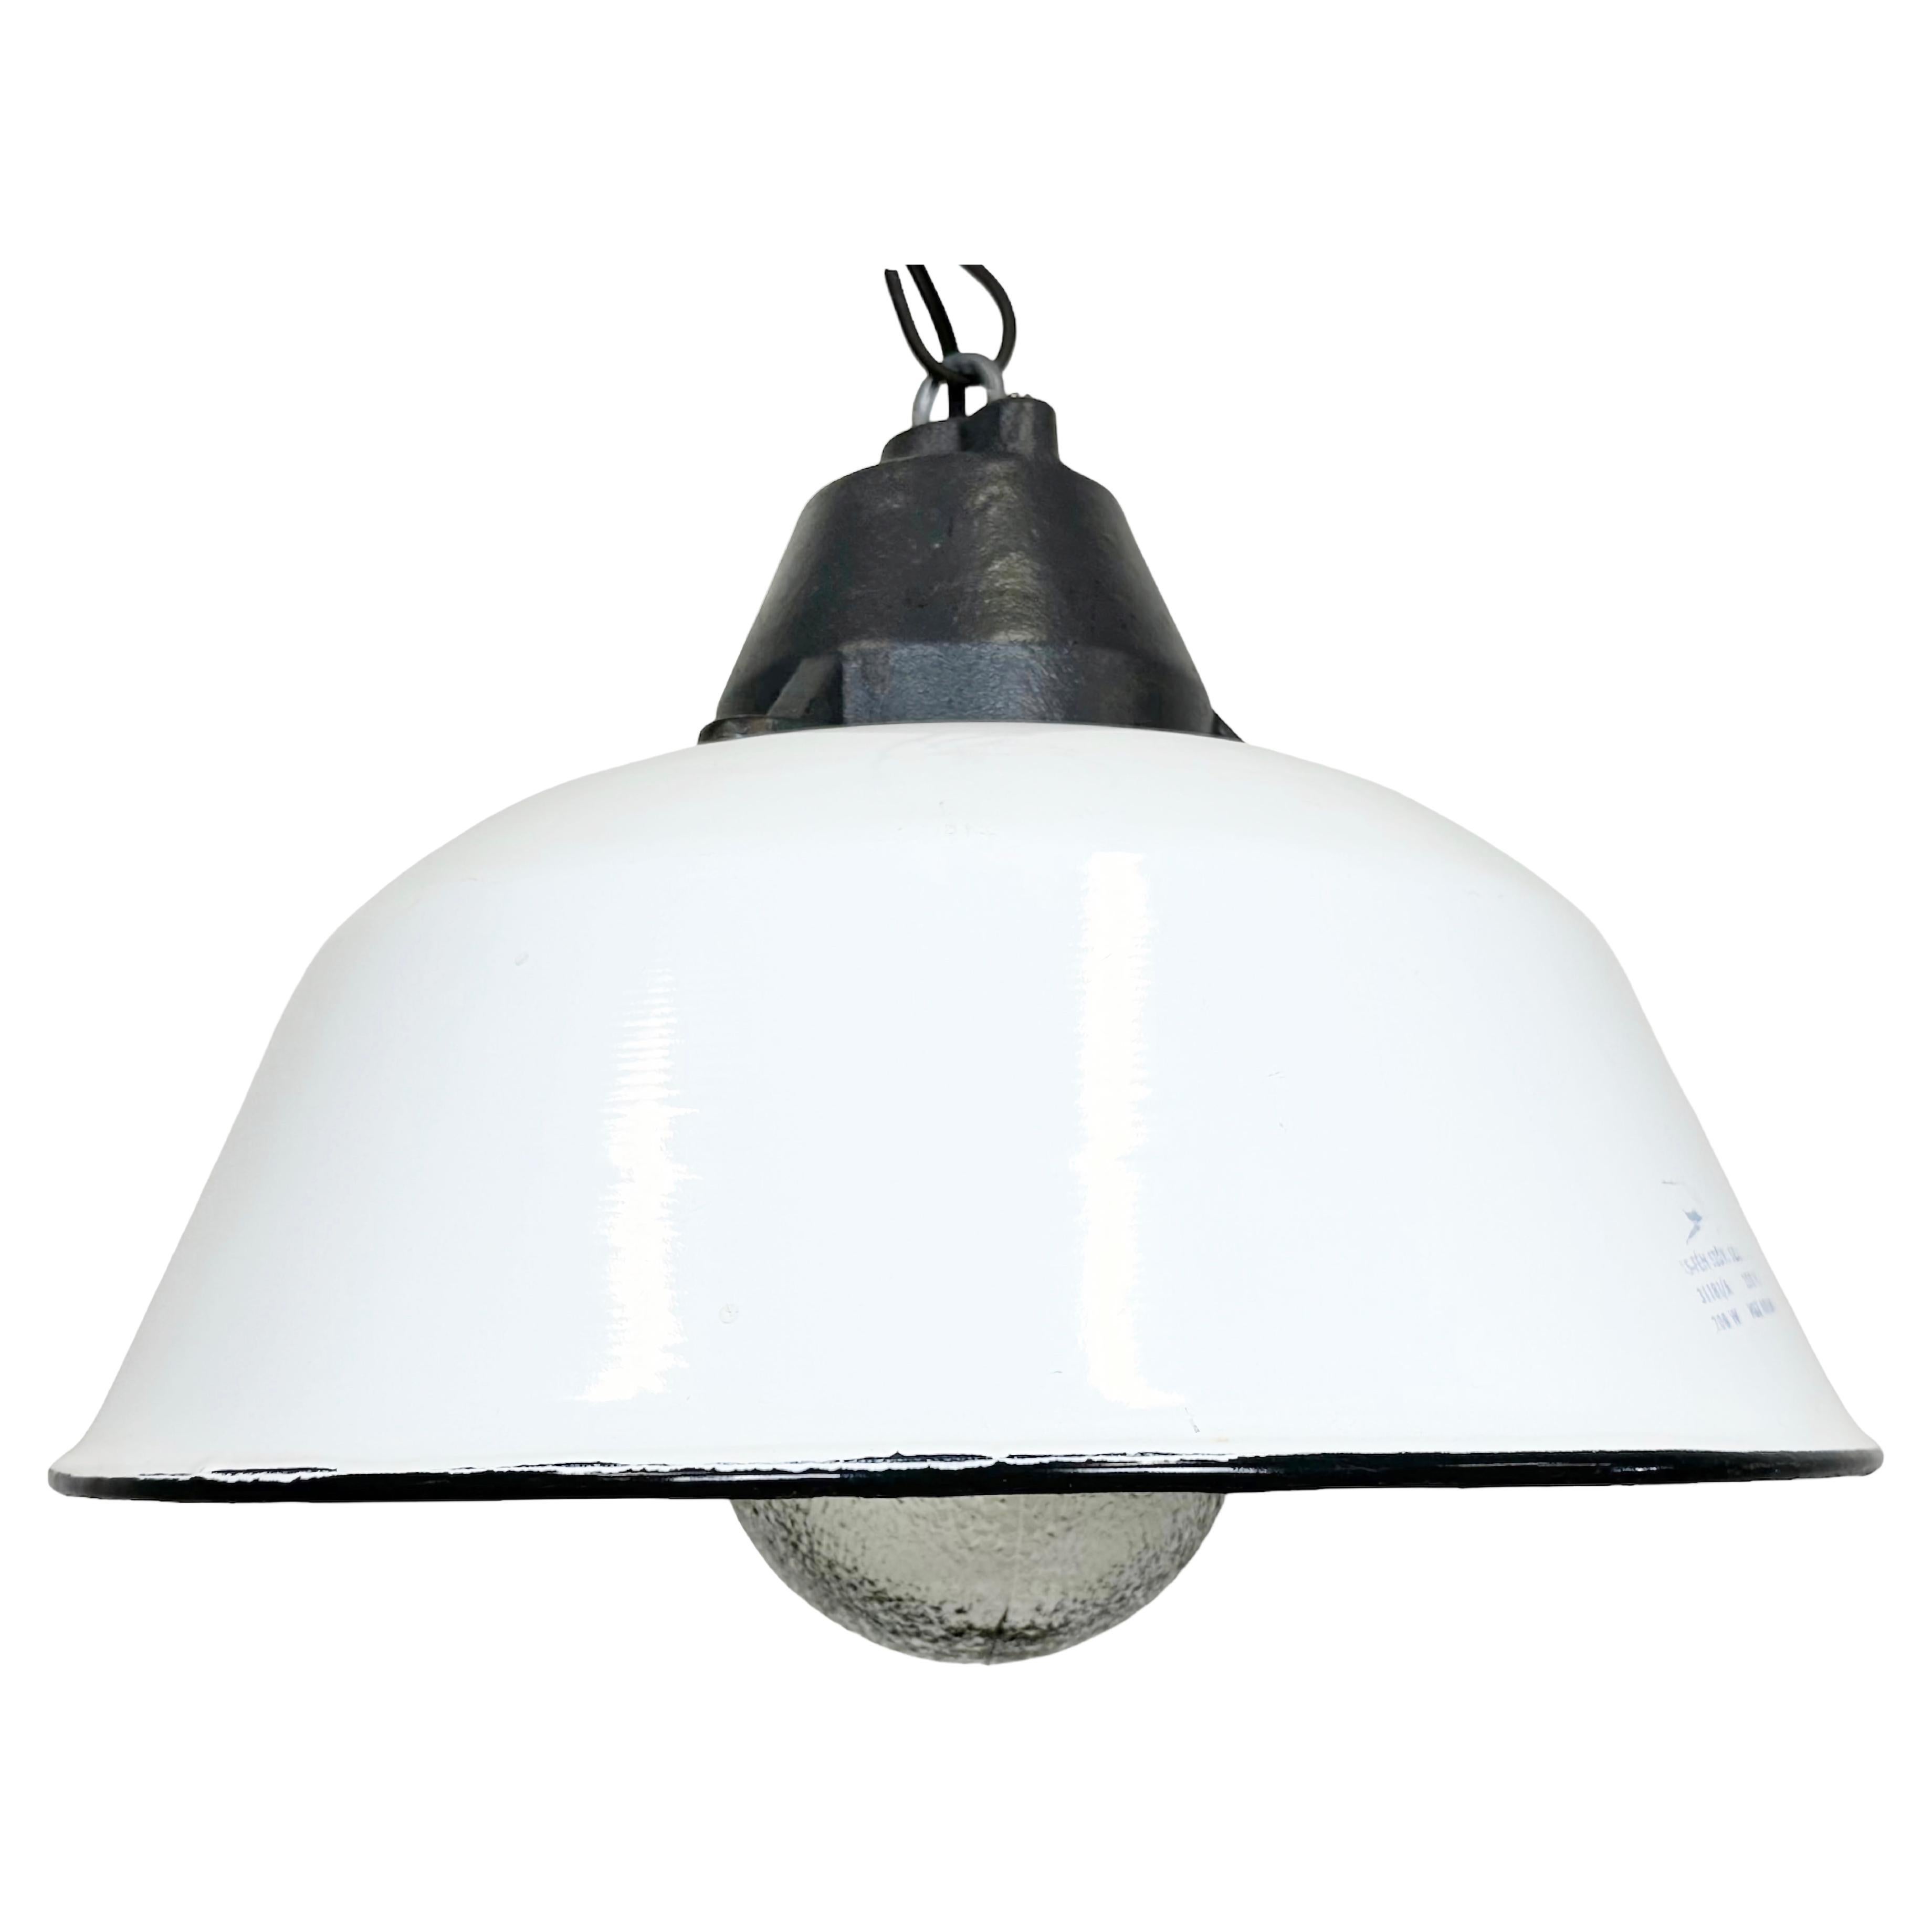 White Enamel and Cast Iron Industrial Pendant Light with Glass Cover, 1960s For Sale